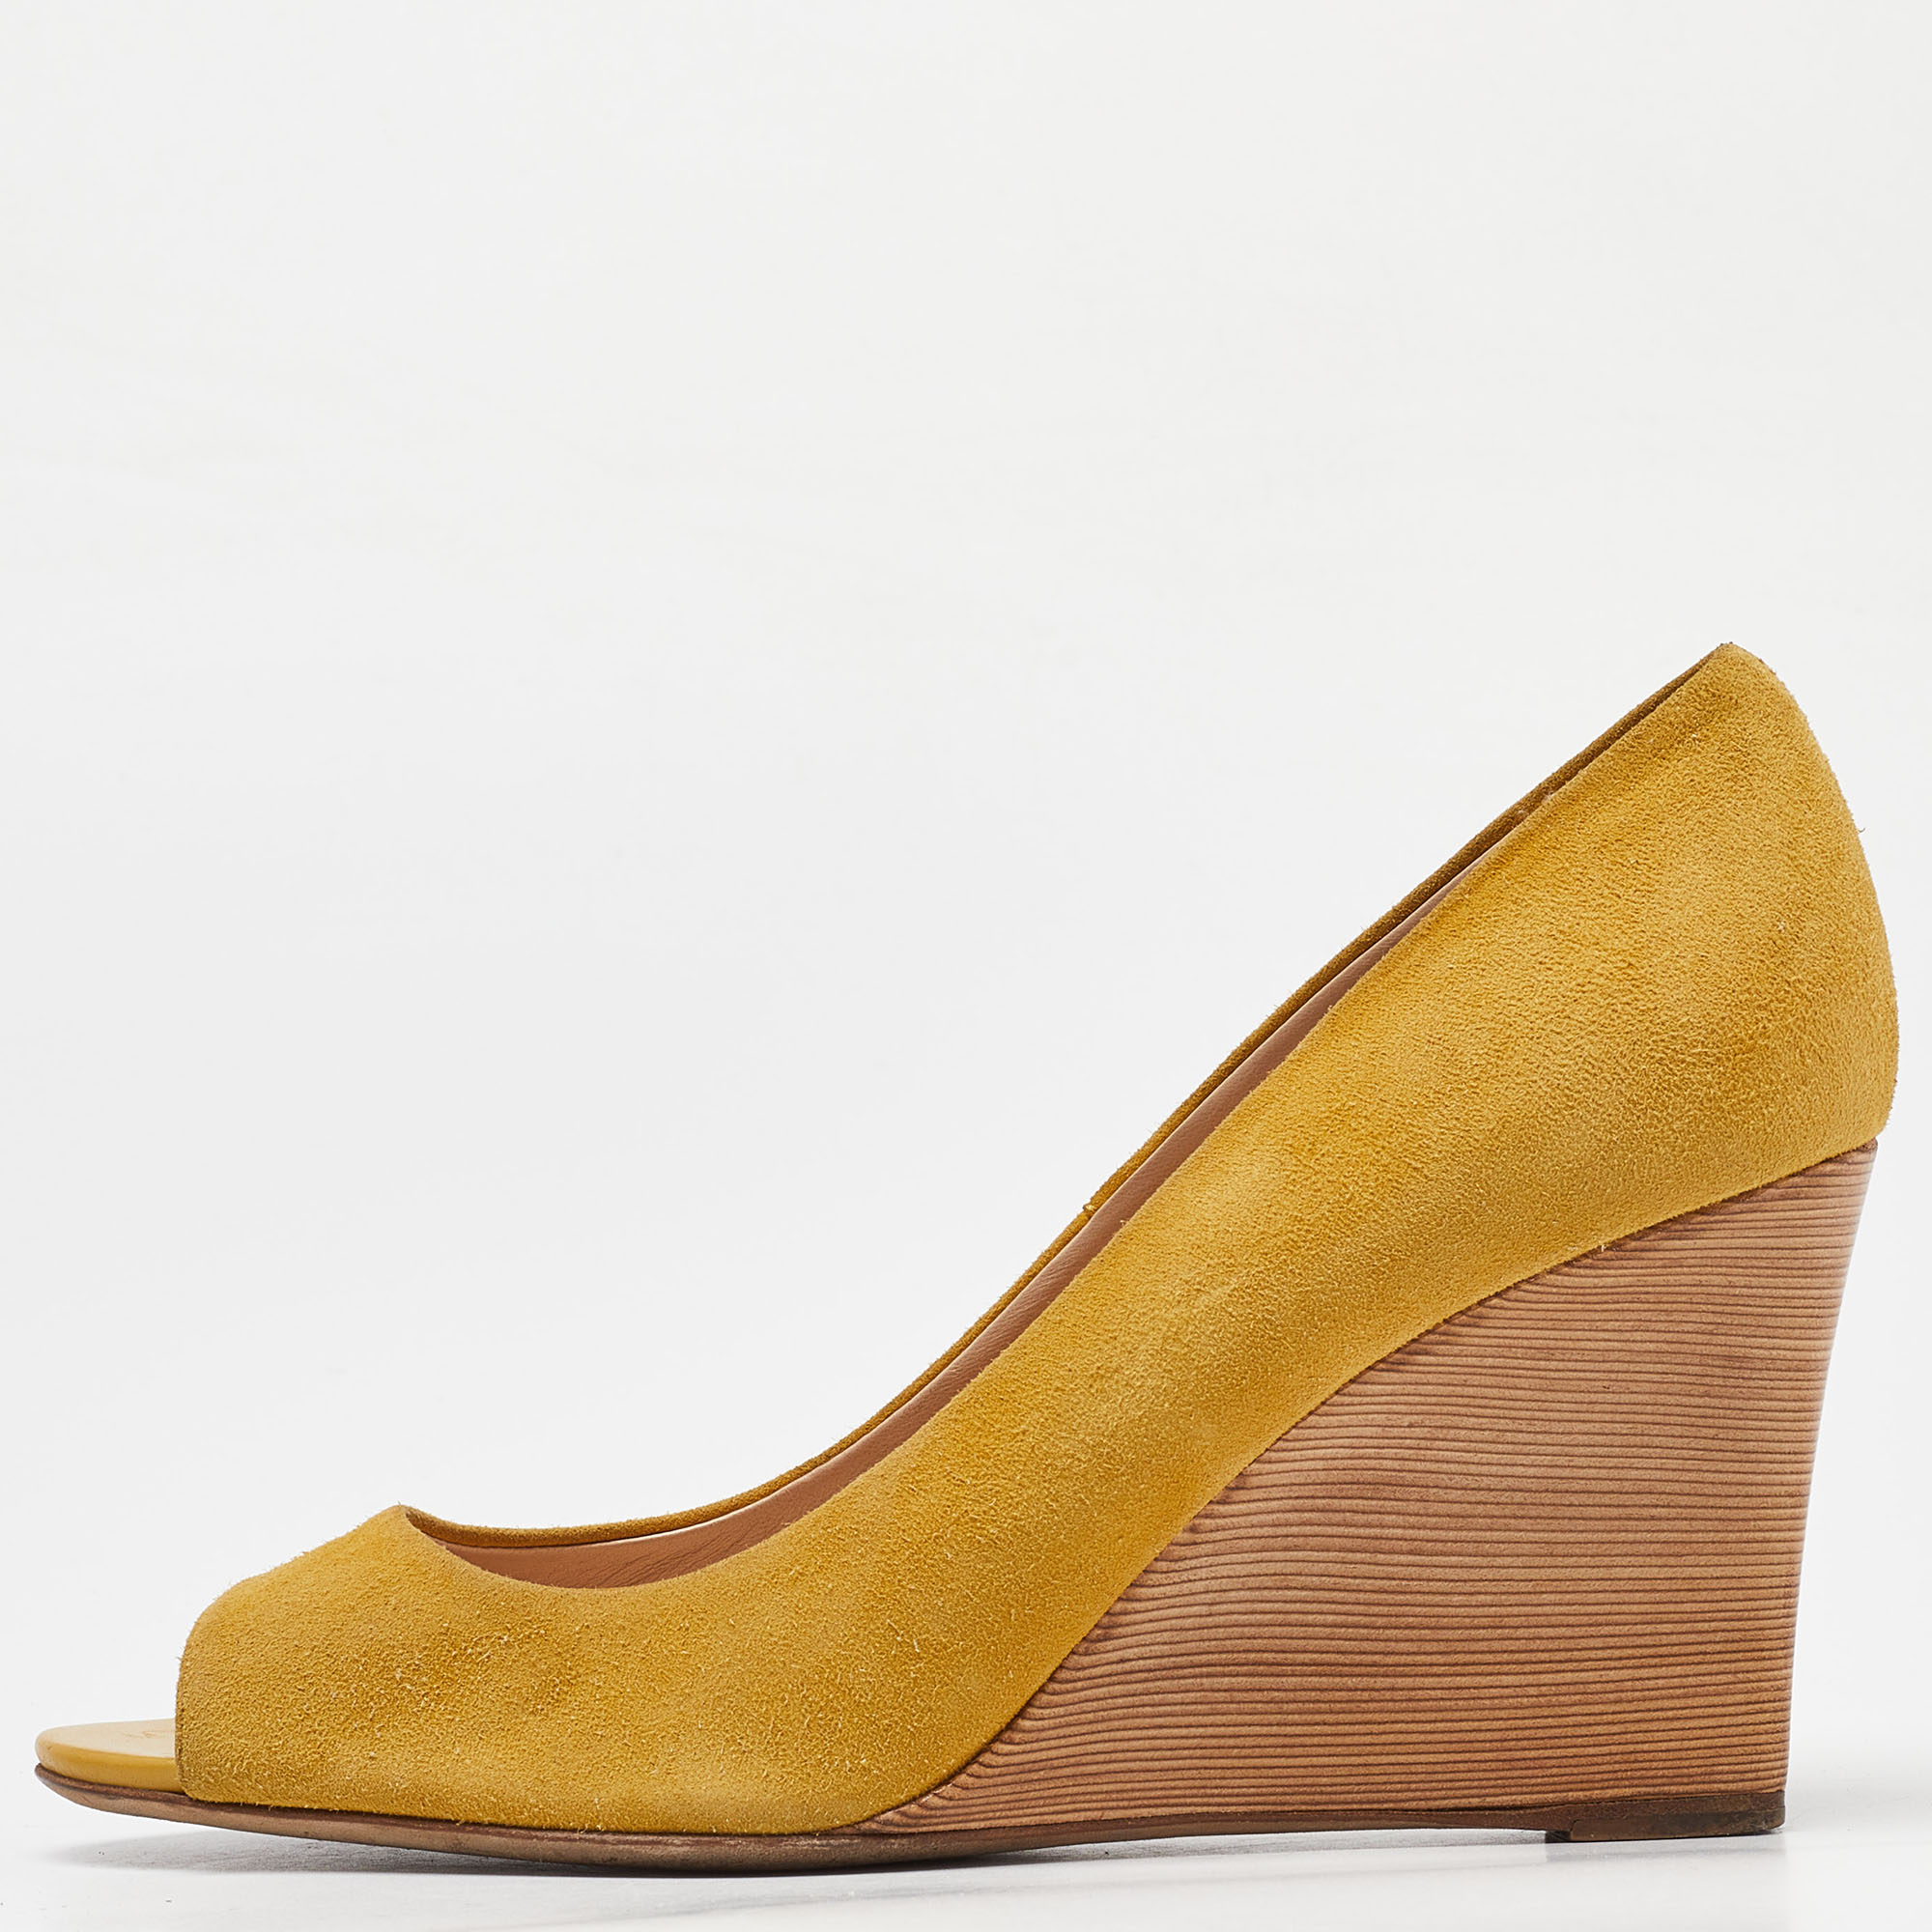 Tod's Yellow Suede Wedge Peep Toe Pumps Size 39